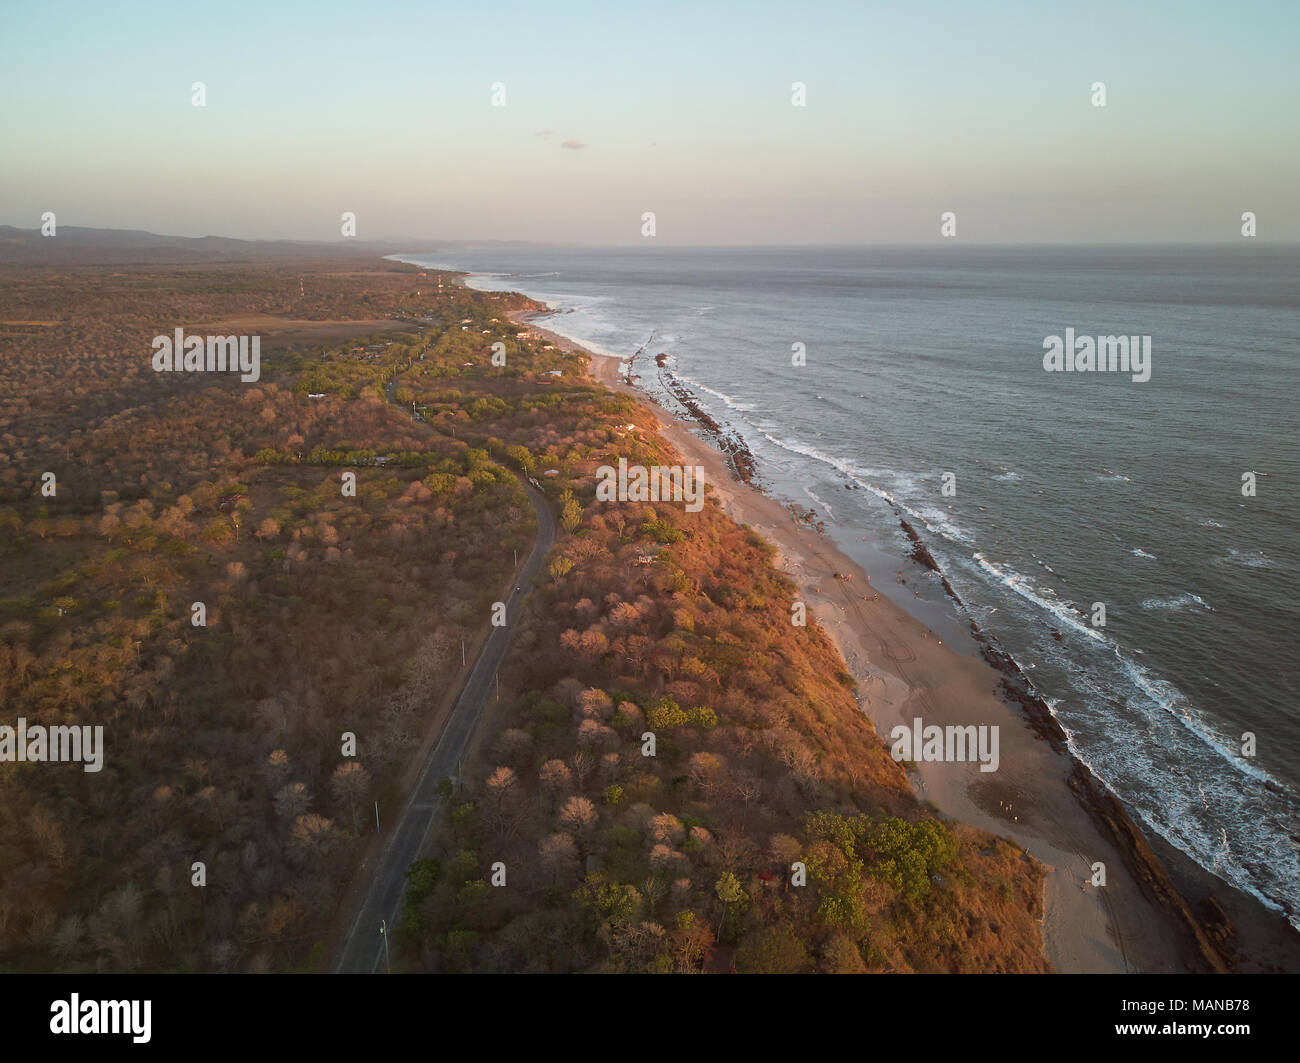 Ocean coastline in sunset time. Beach with road aerial view Stock Photo